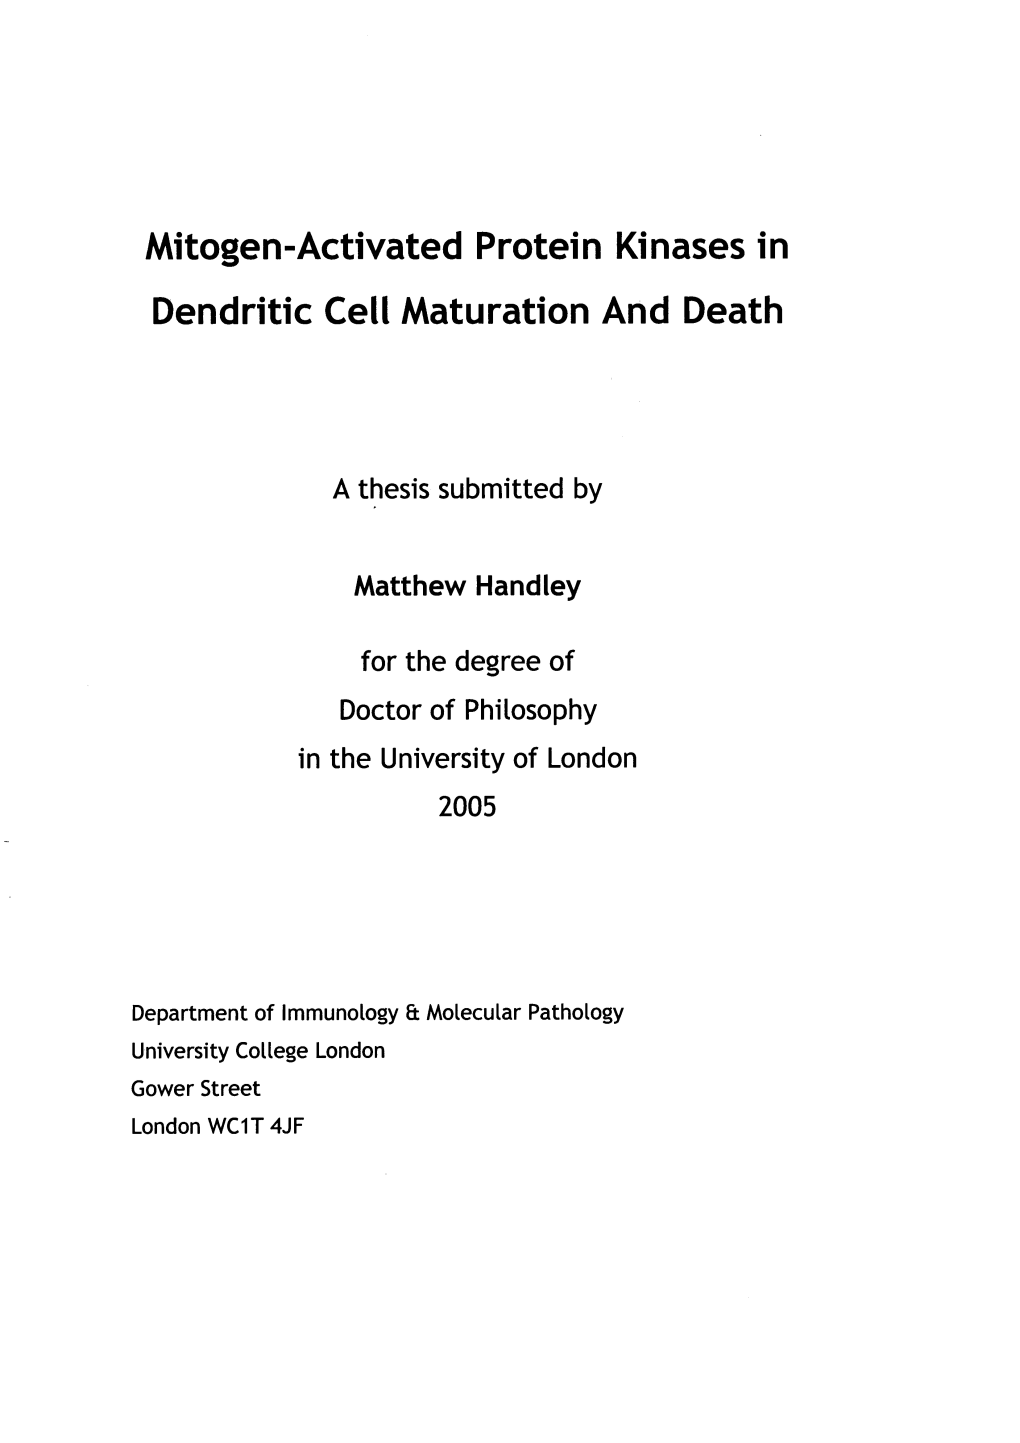 Mitogen-Activated Protein Kinases in Dendritic Cell Maturation and Death